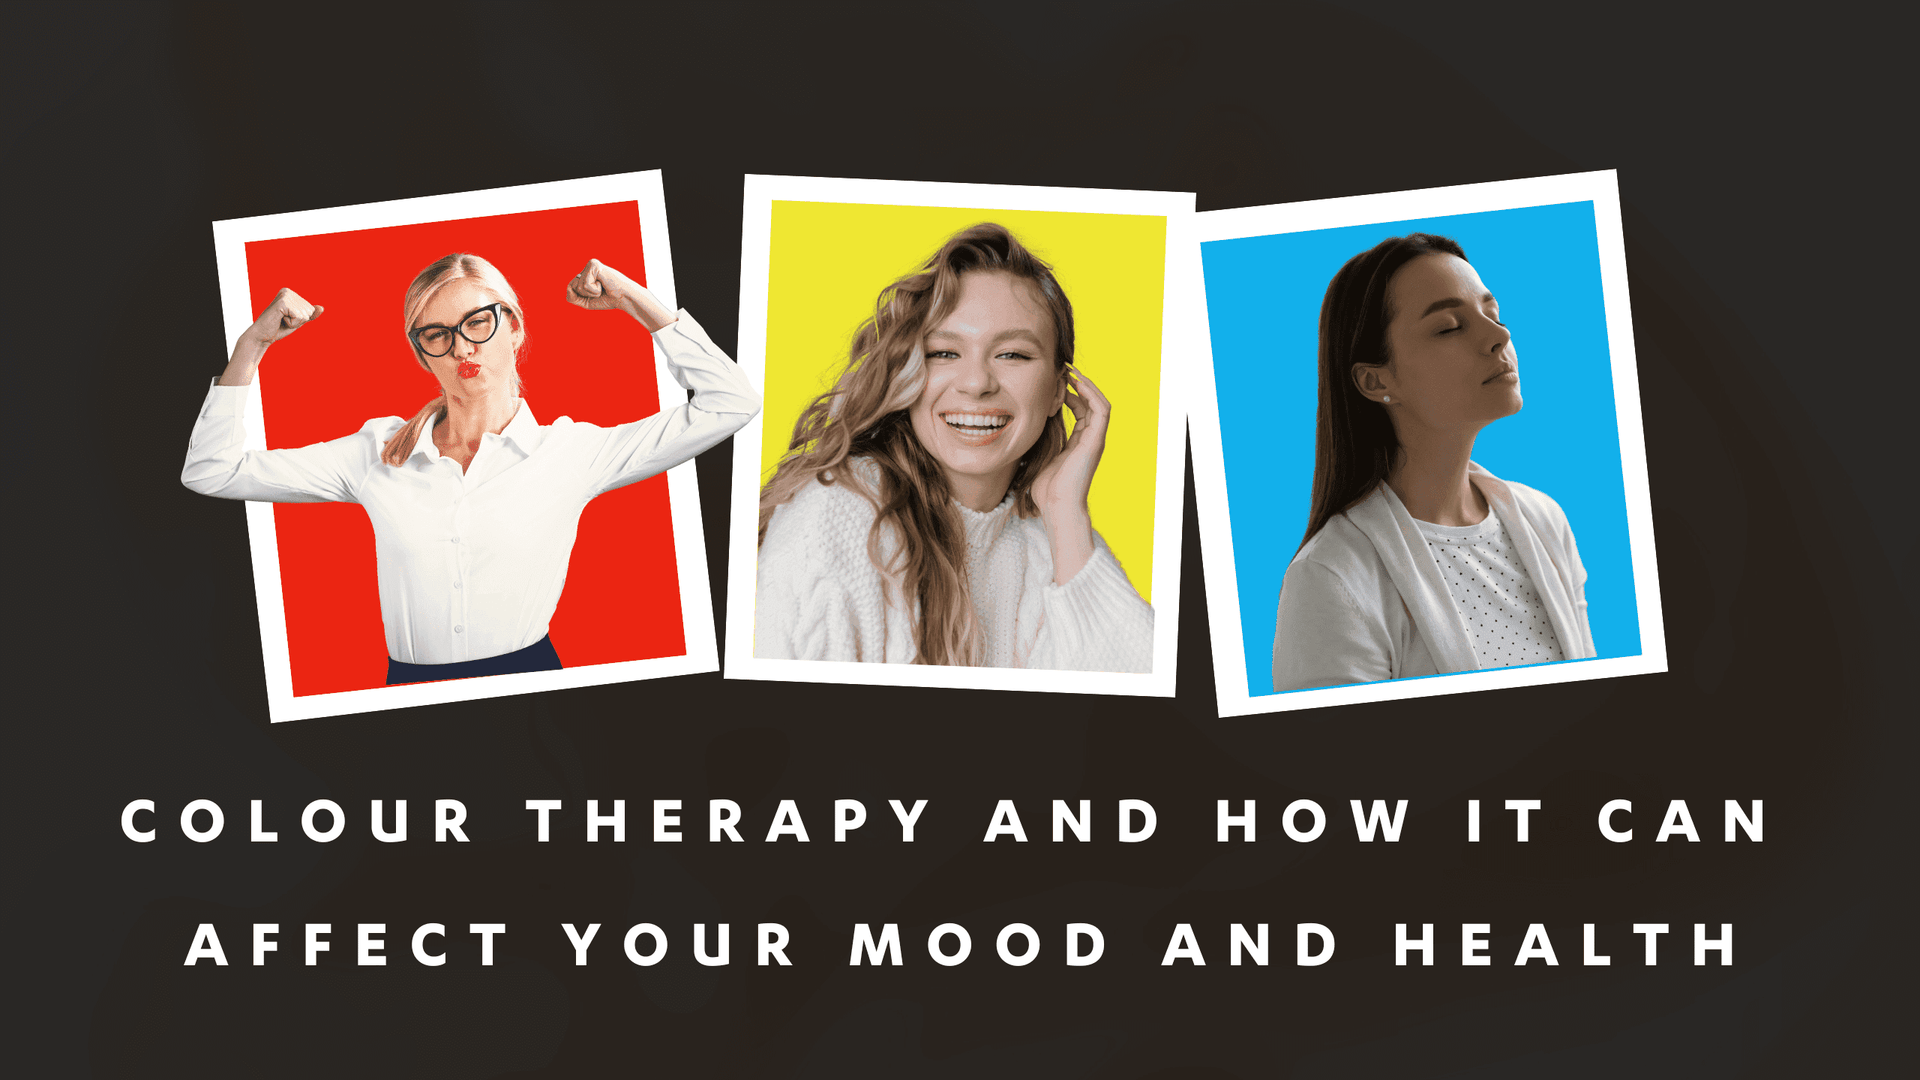 Dr Kez ChiroLab Colour Therapy Chromotherapy how it affects your mood and health